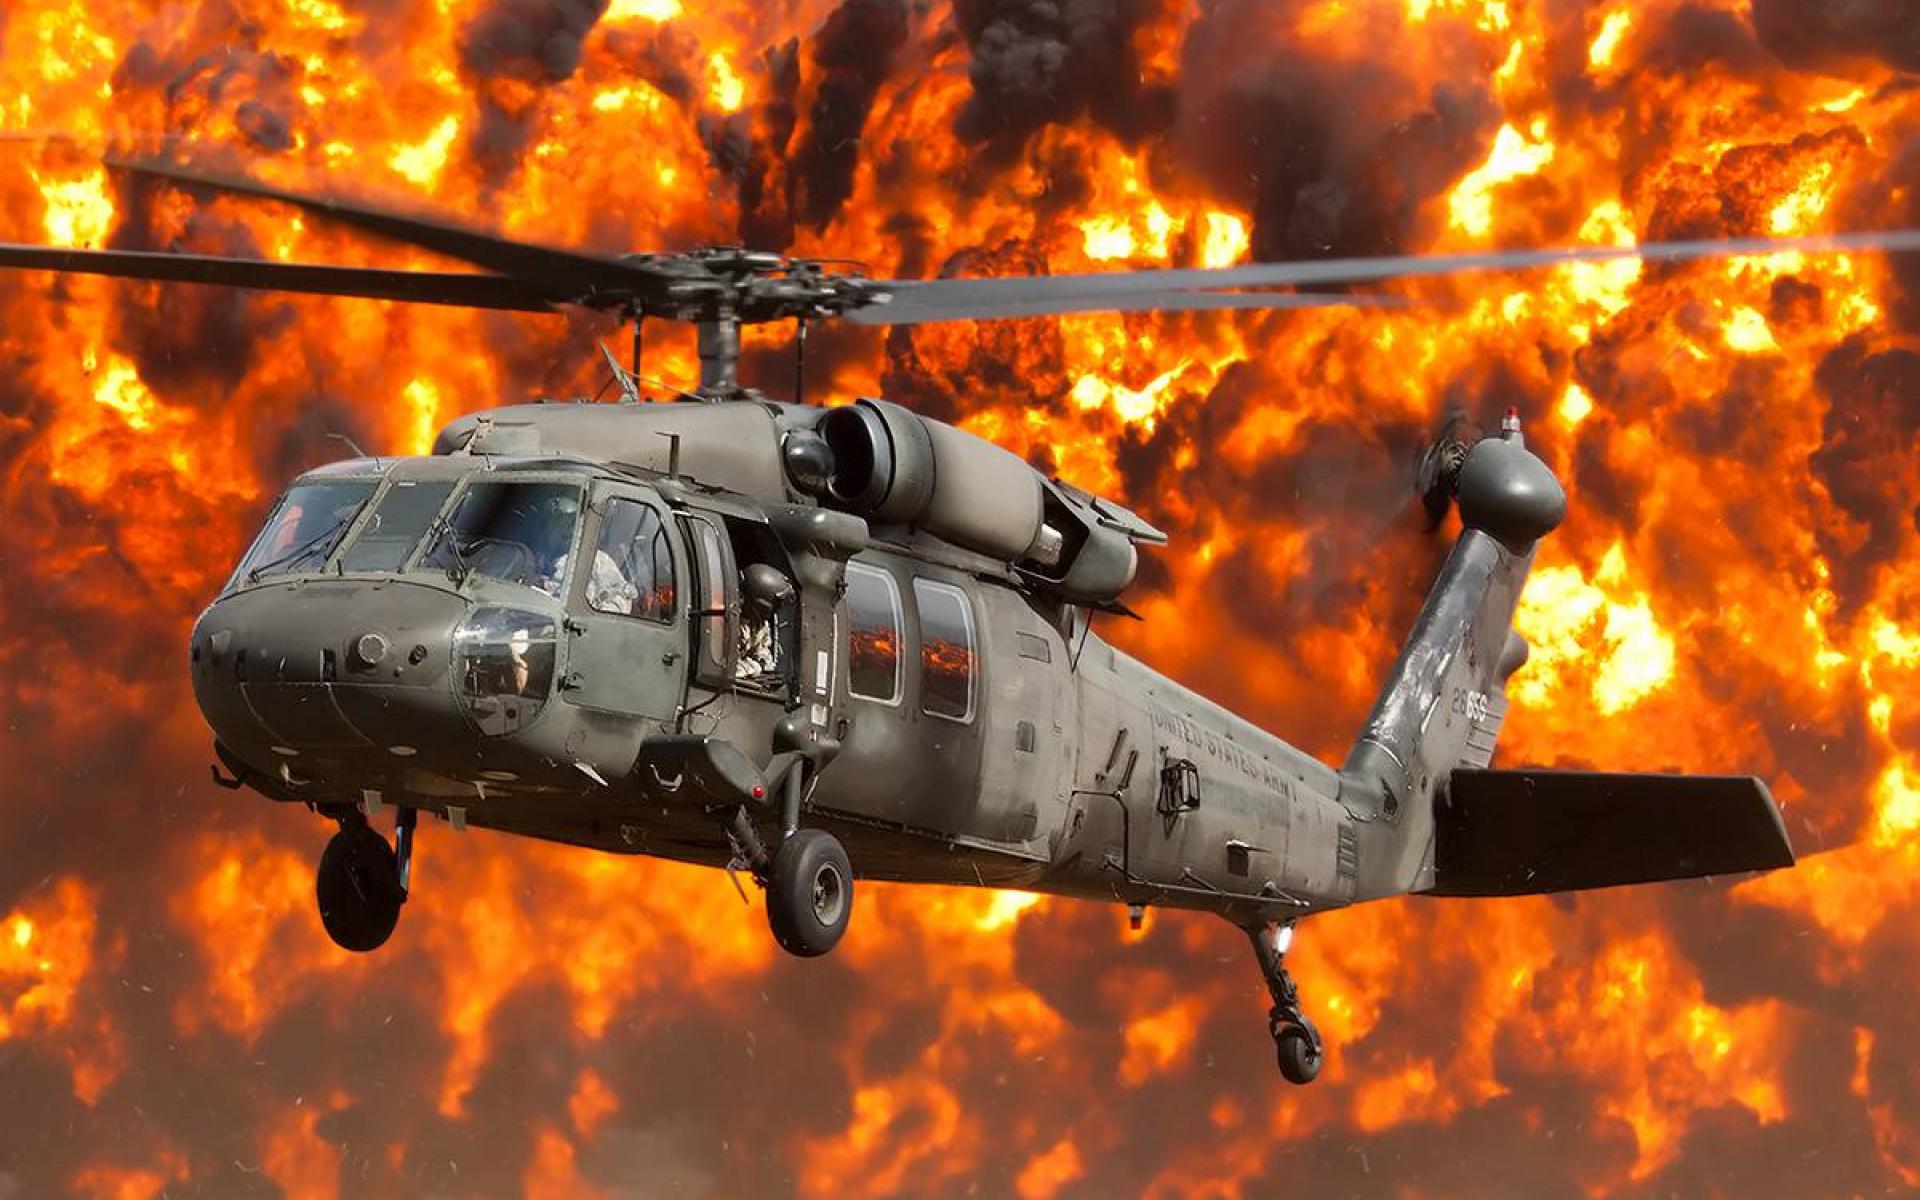 Aircraft military helicopters napalm wallpaper HQ WALLPAPER   535